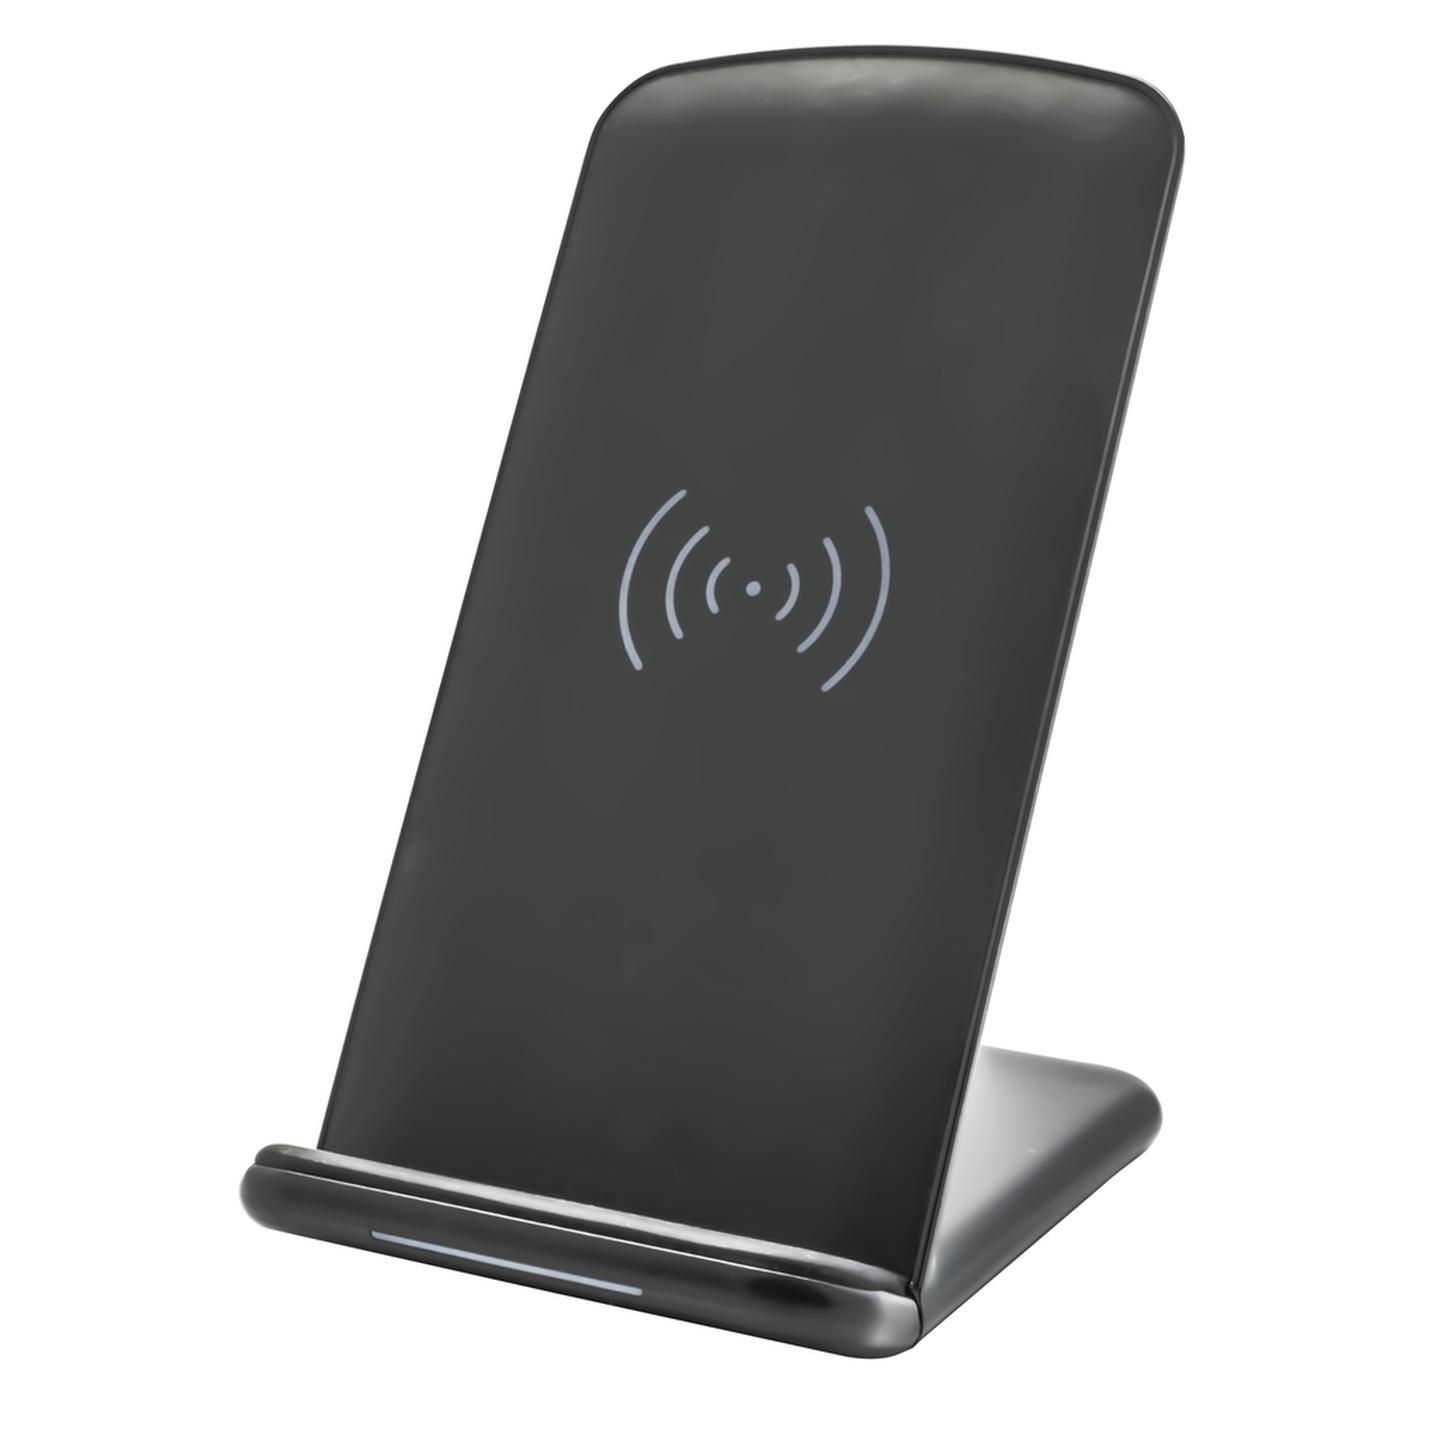 15W Fast Charge Qi Wireless Charging Stand